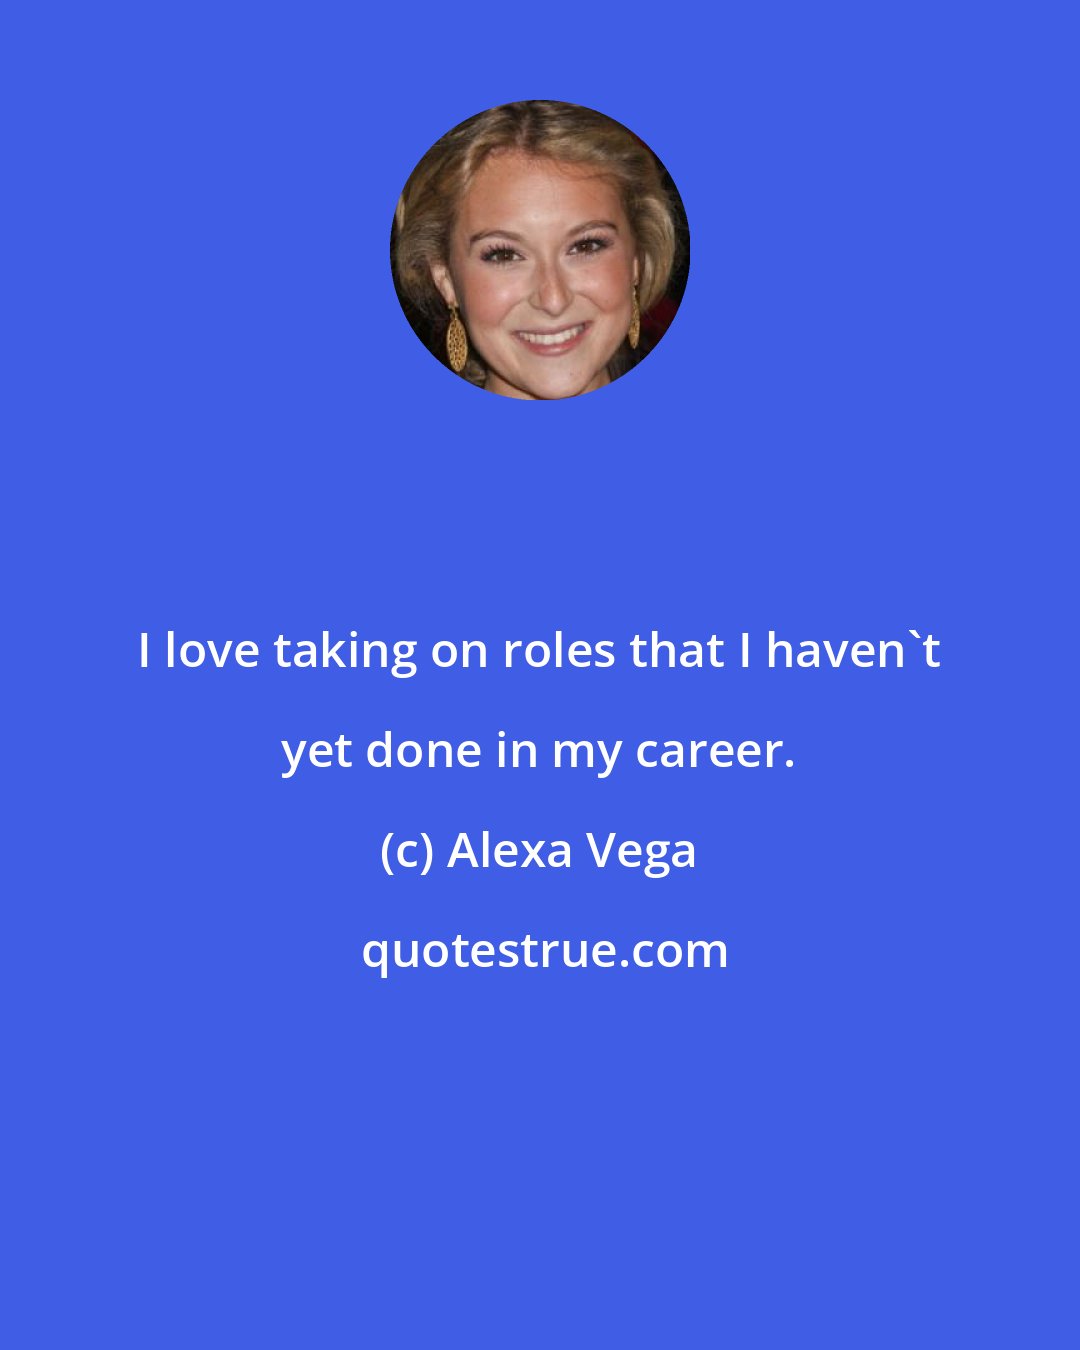 Alexa Vega: I love taking on roles that I haven't yet done in my career.